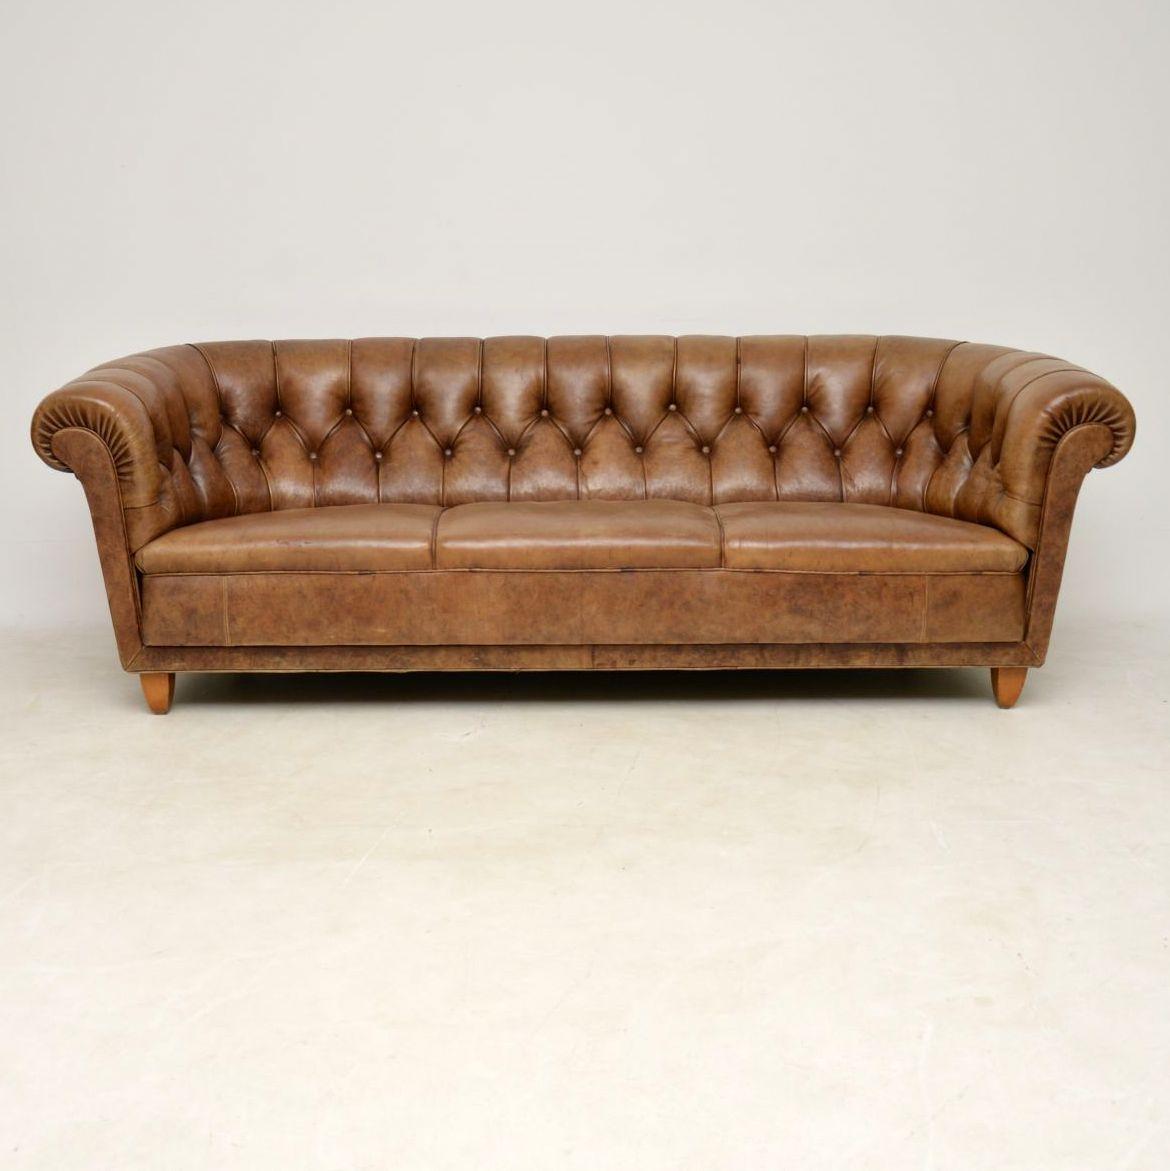 Very stylish looking antique Swedish three-seat leather Chesterfield in good original condition and with a wonderful color, plus loads of character. This Chesterfield is basically a Swedish take on the classic English version. I think the only way